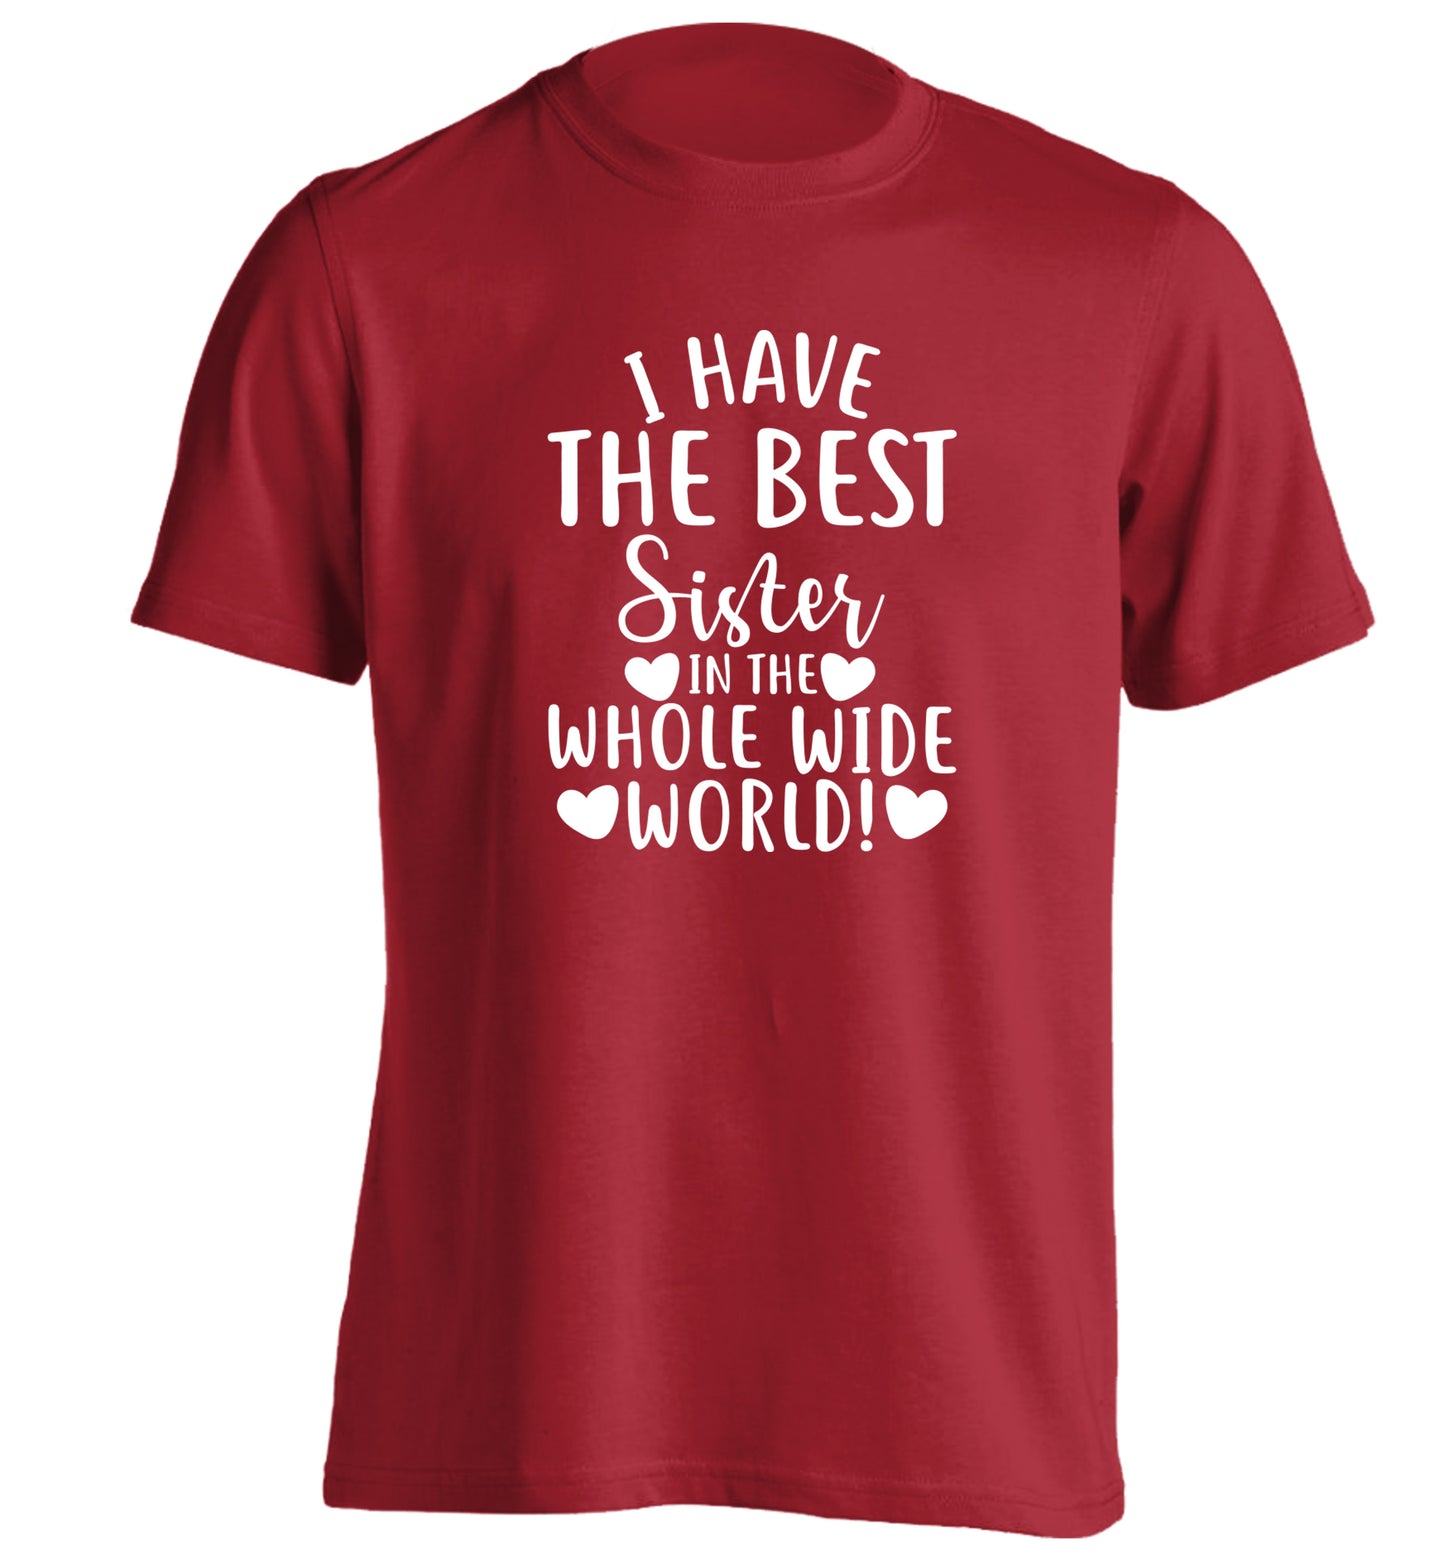 I have the best sister in the whole wide world! adults unisex red Tshirt 2XL